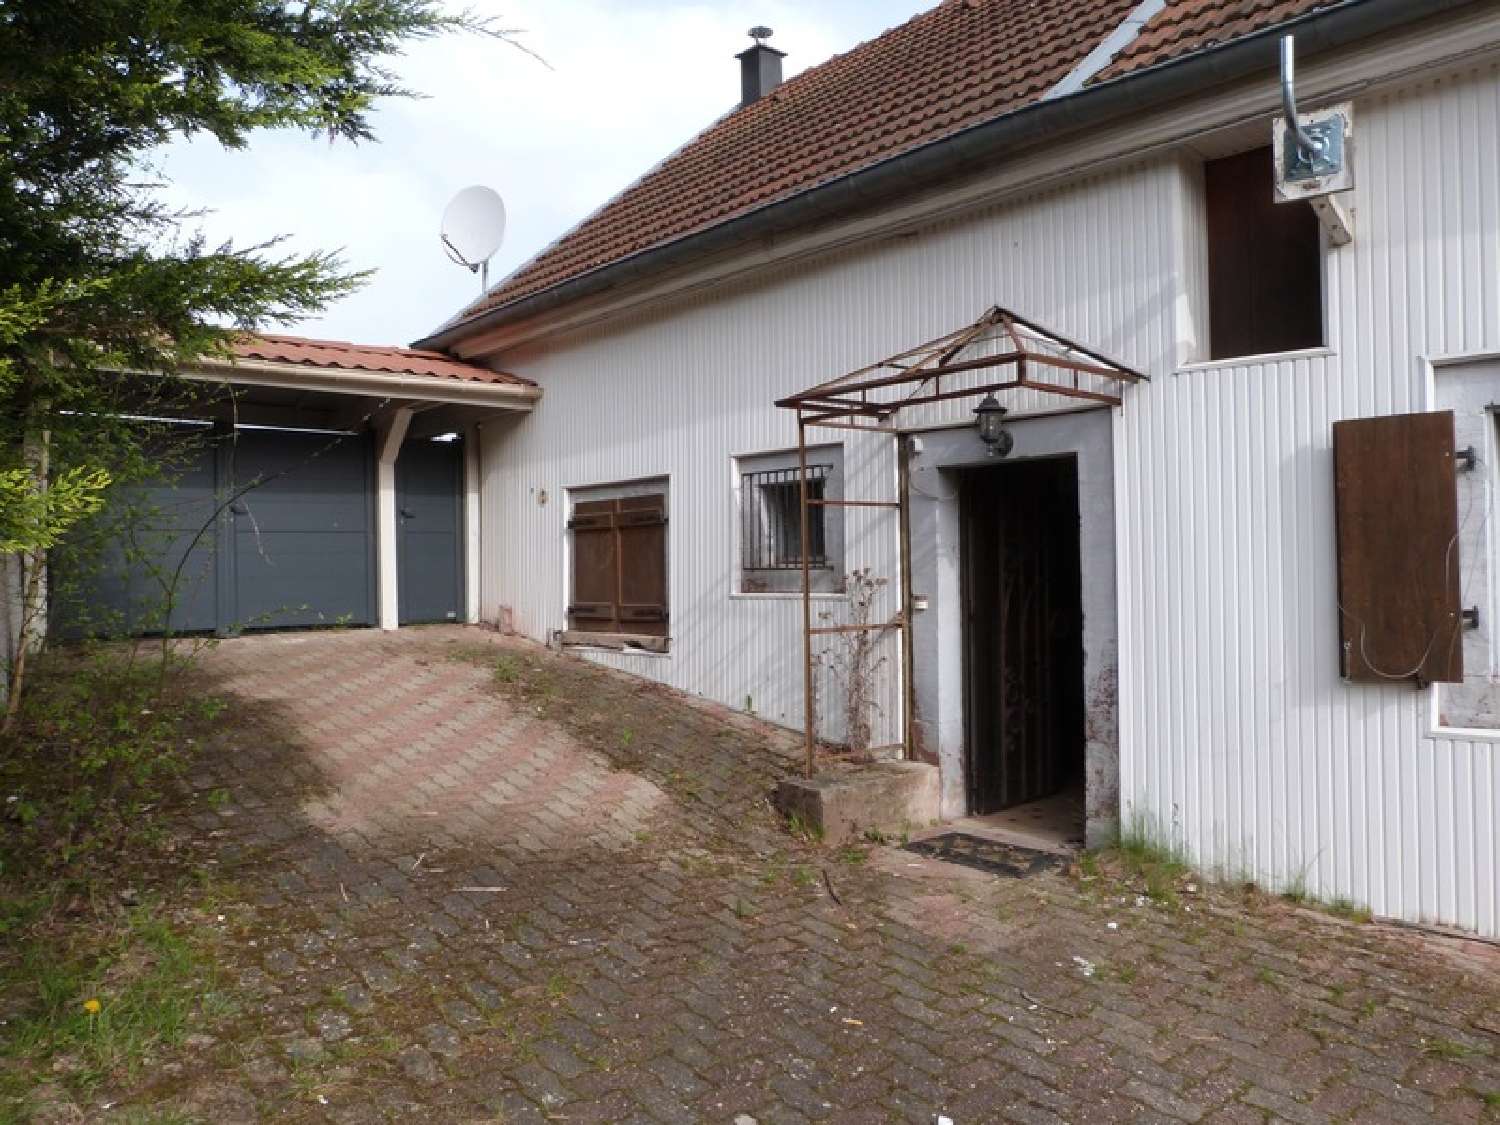  for sale house Soucht Moselle 8